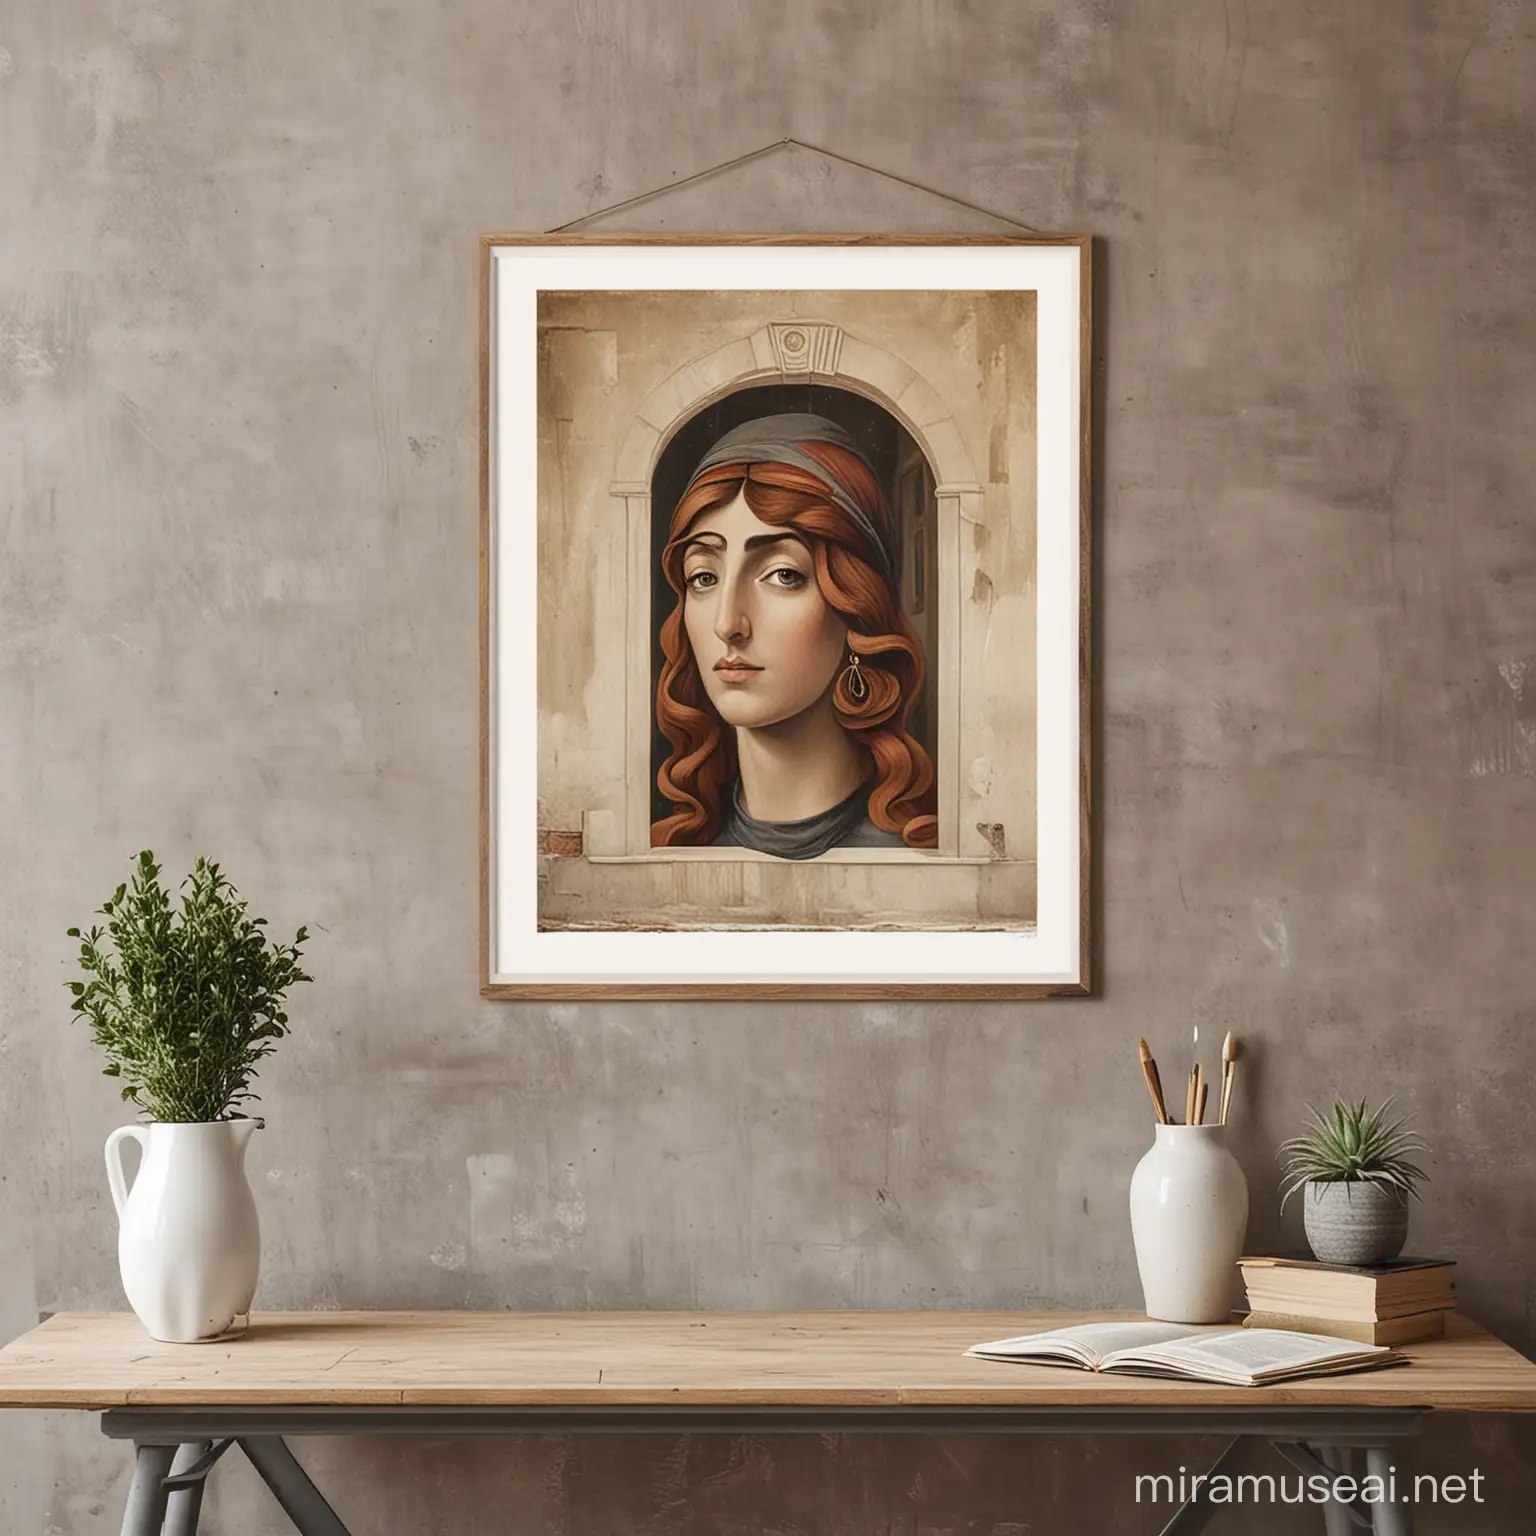 make me an Etsy mock up background to display an italian poster print hanging on the wall 